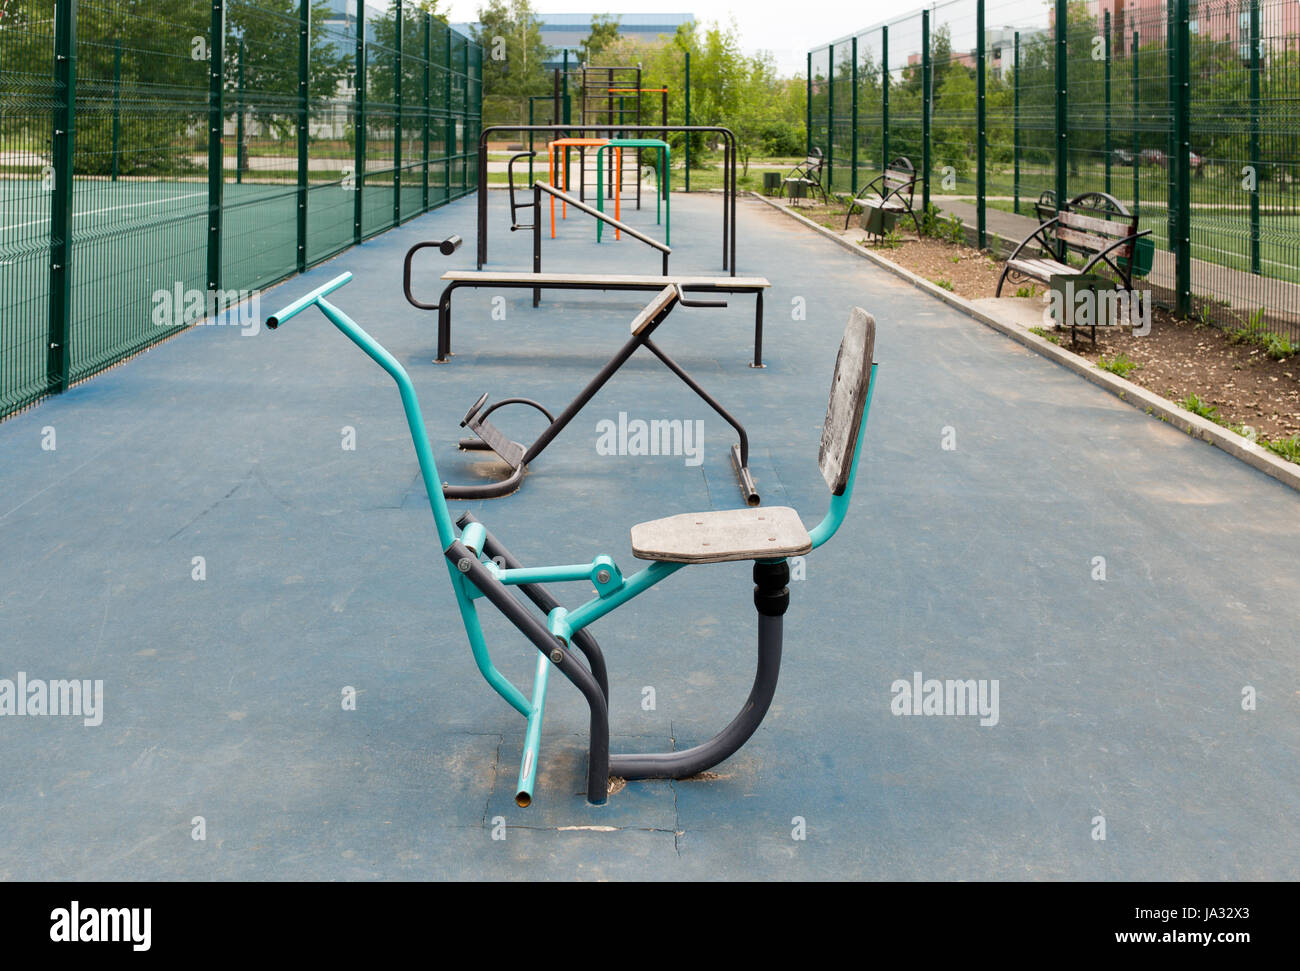 Views of the sports ground for street workout. Public area for sports training in the park. Stock Photo